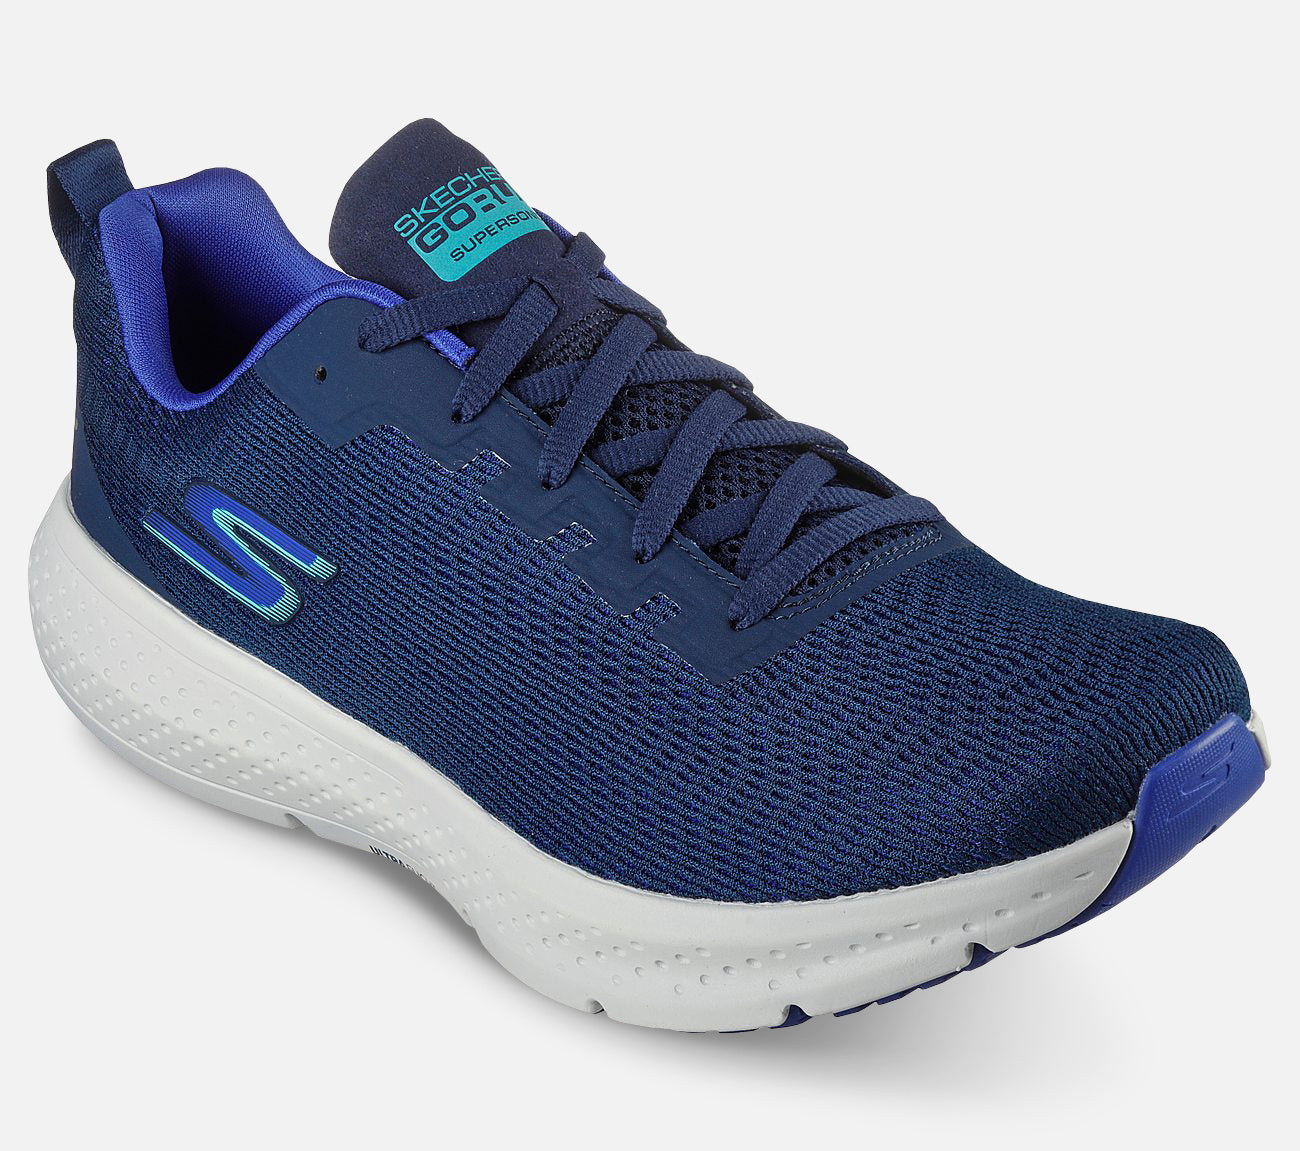 Relaxed Fit: GO RUN Supersonic Shoe Skechers